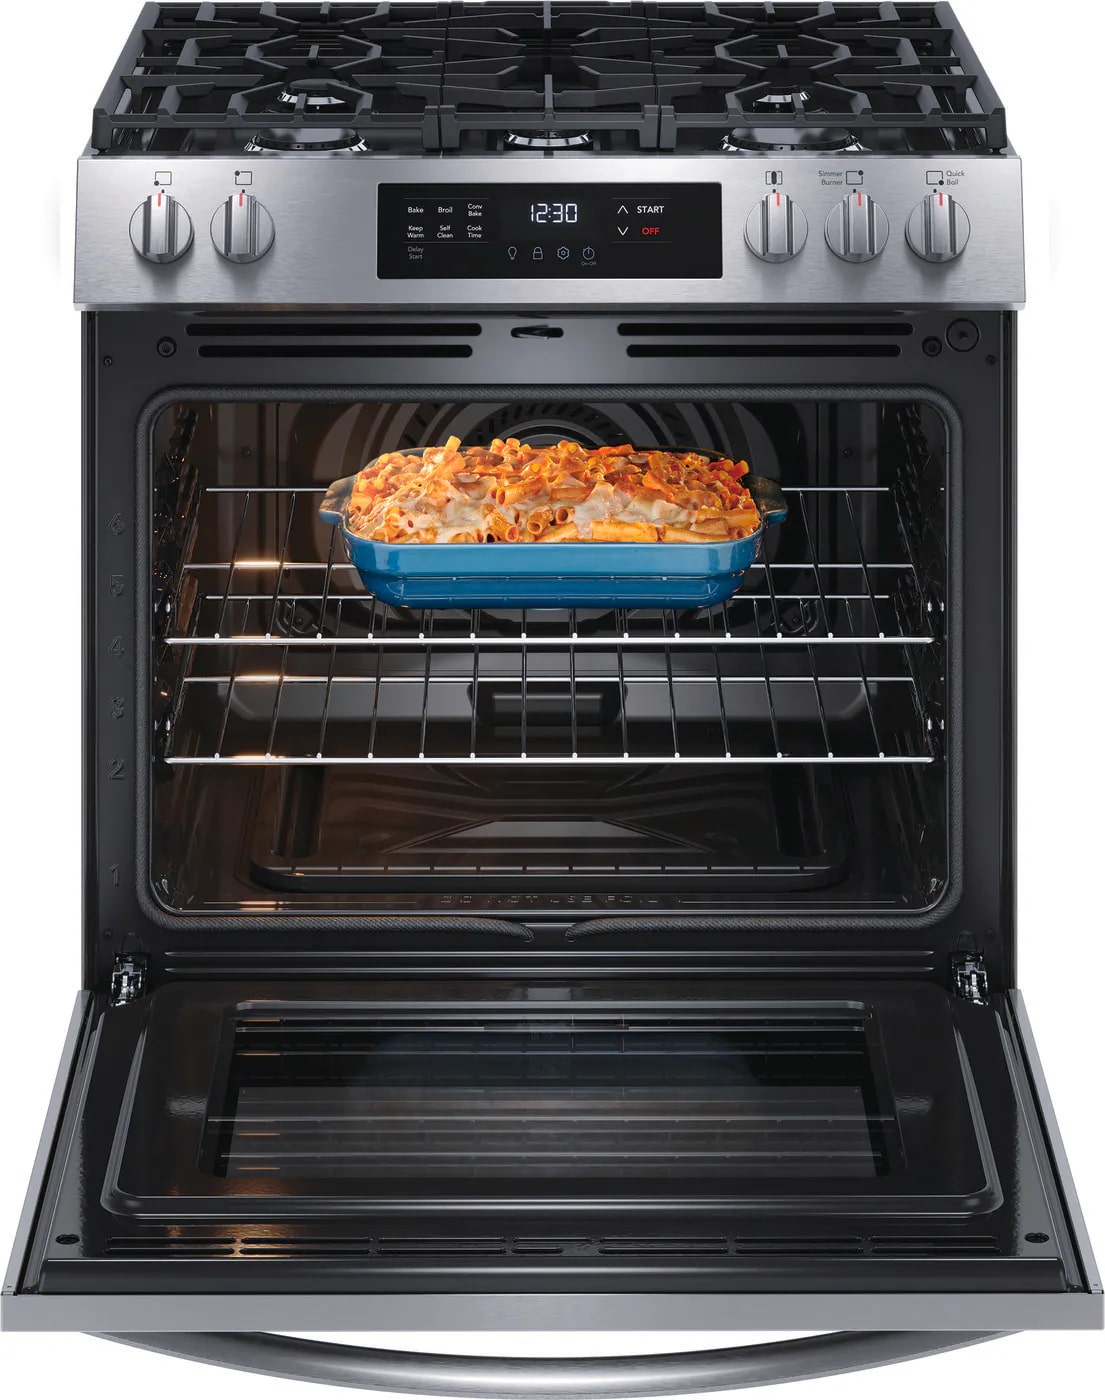 Frigidaire - 5.1 cu. ft  Gas Range in Stainless - FCFG3083AS